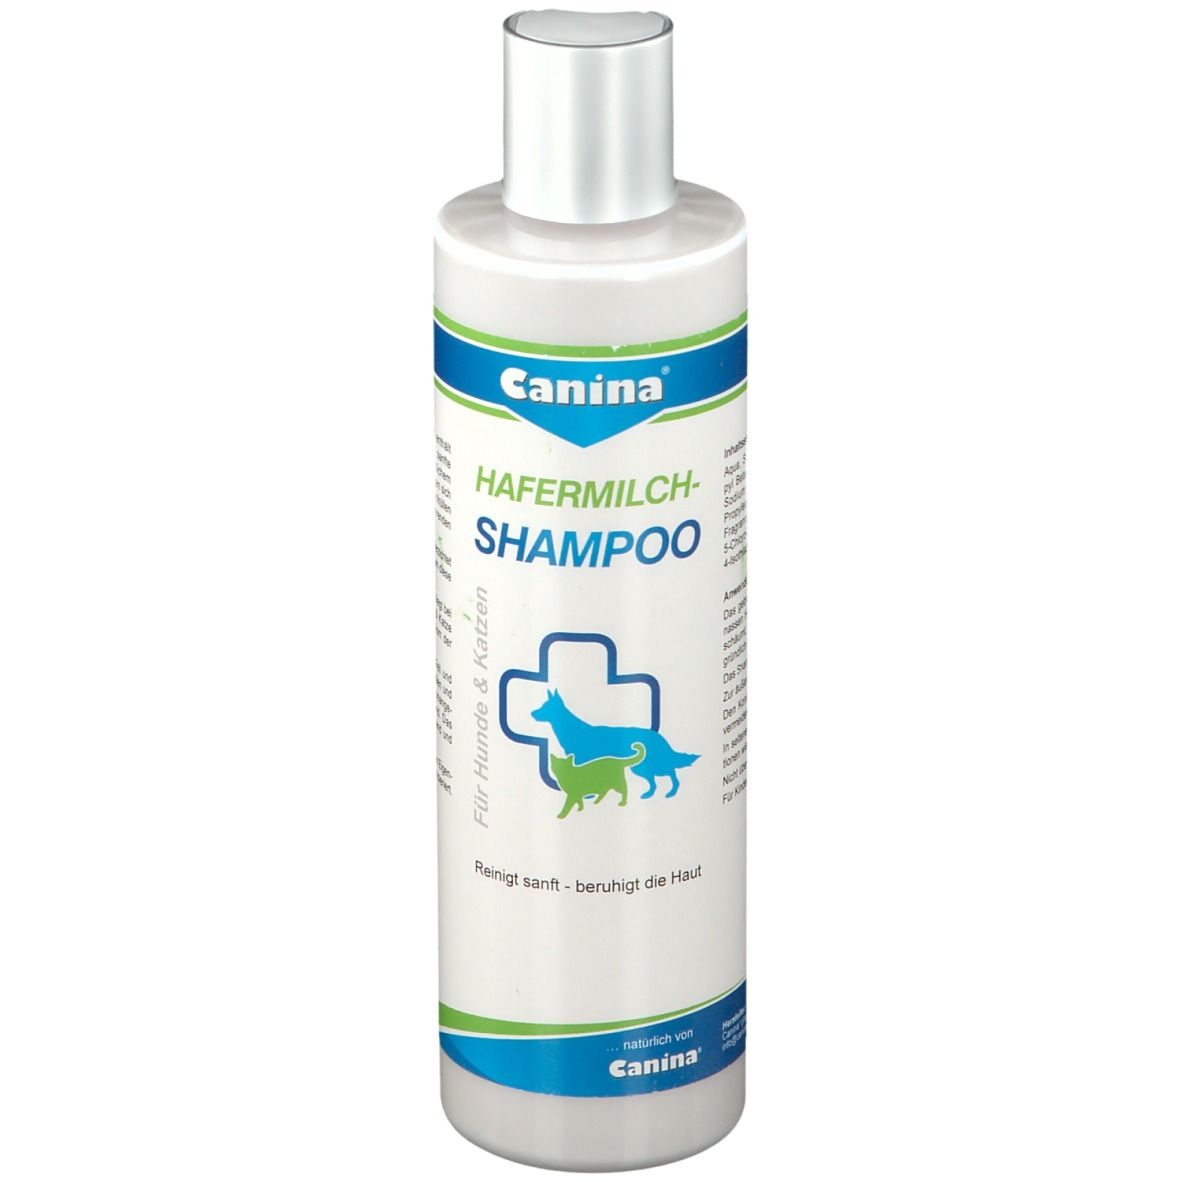 Image of Canina® Hafermilch-Shampoo